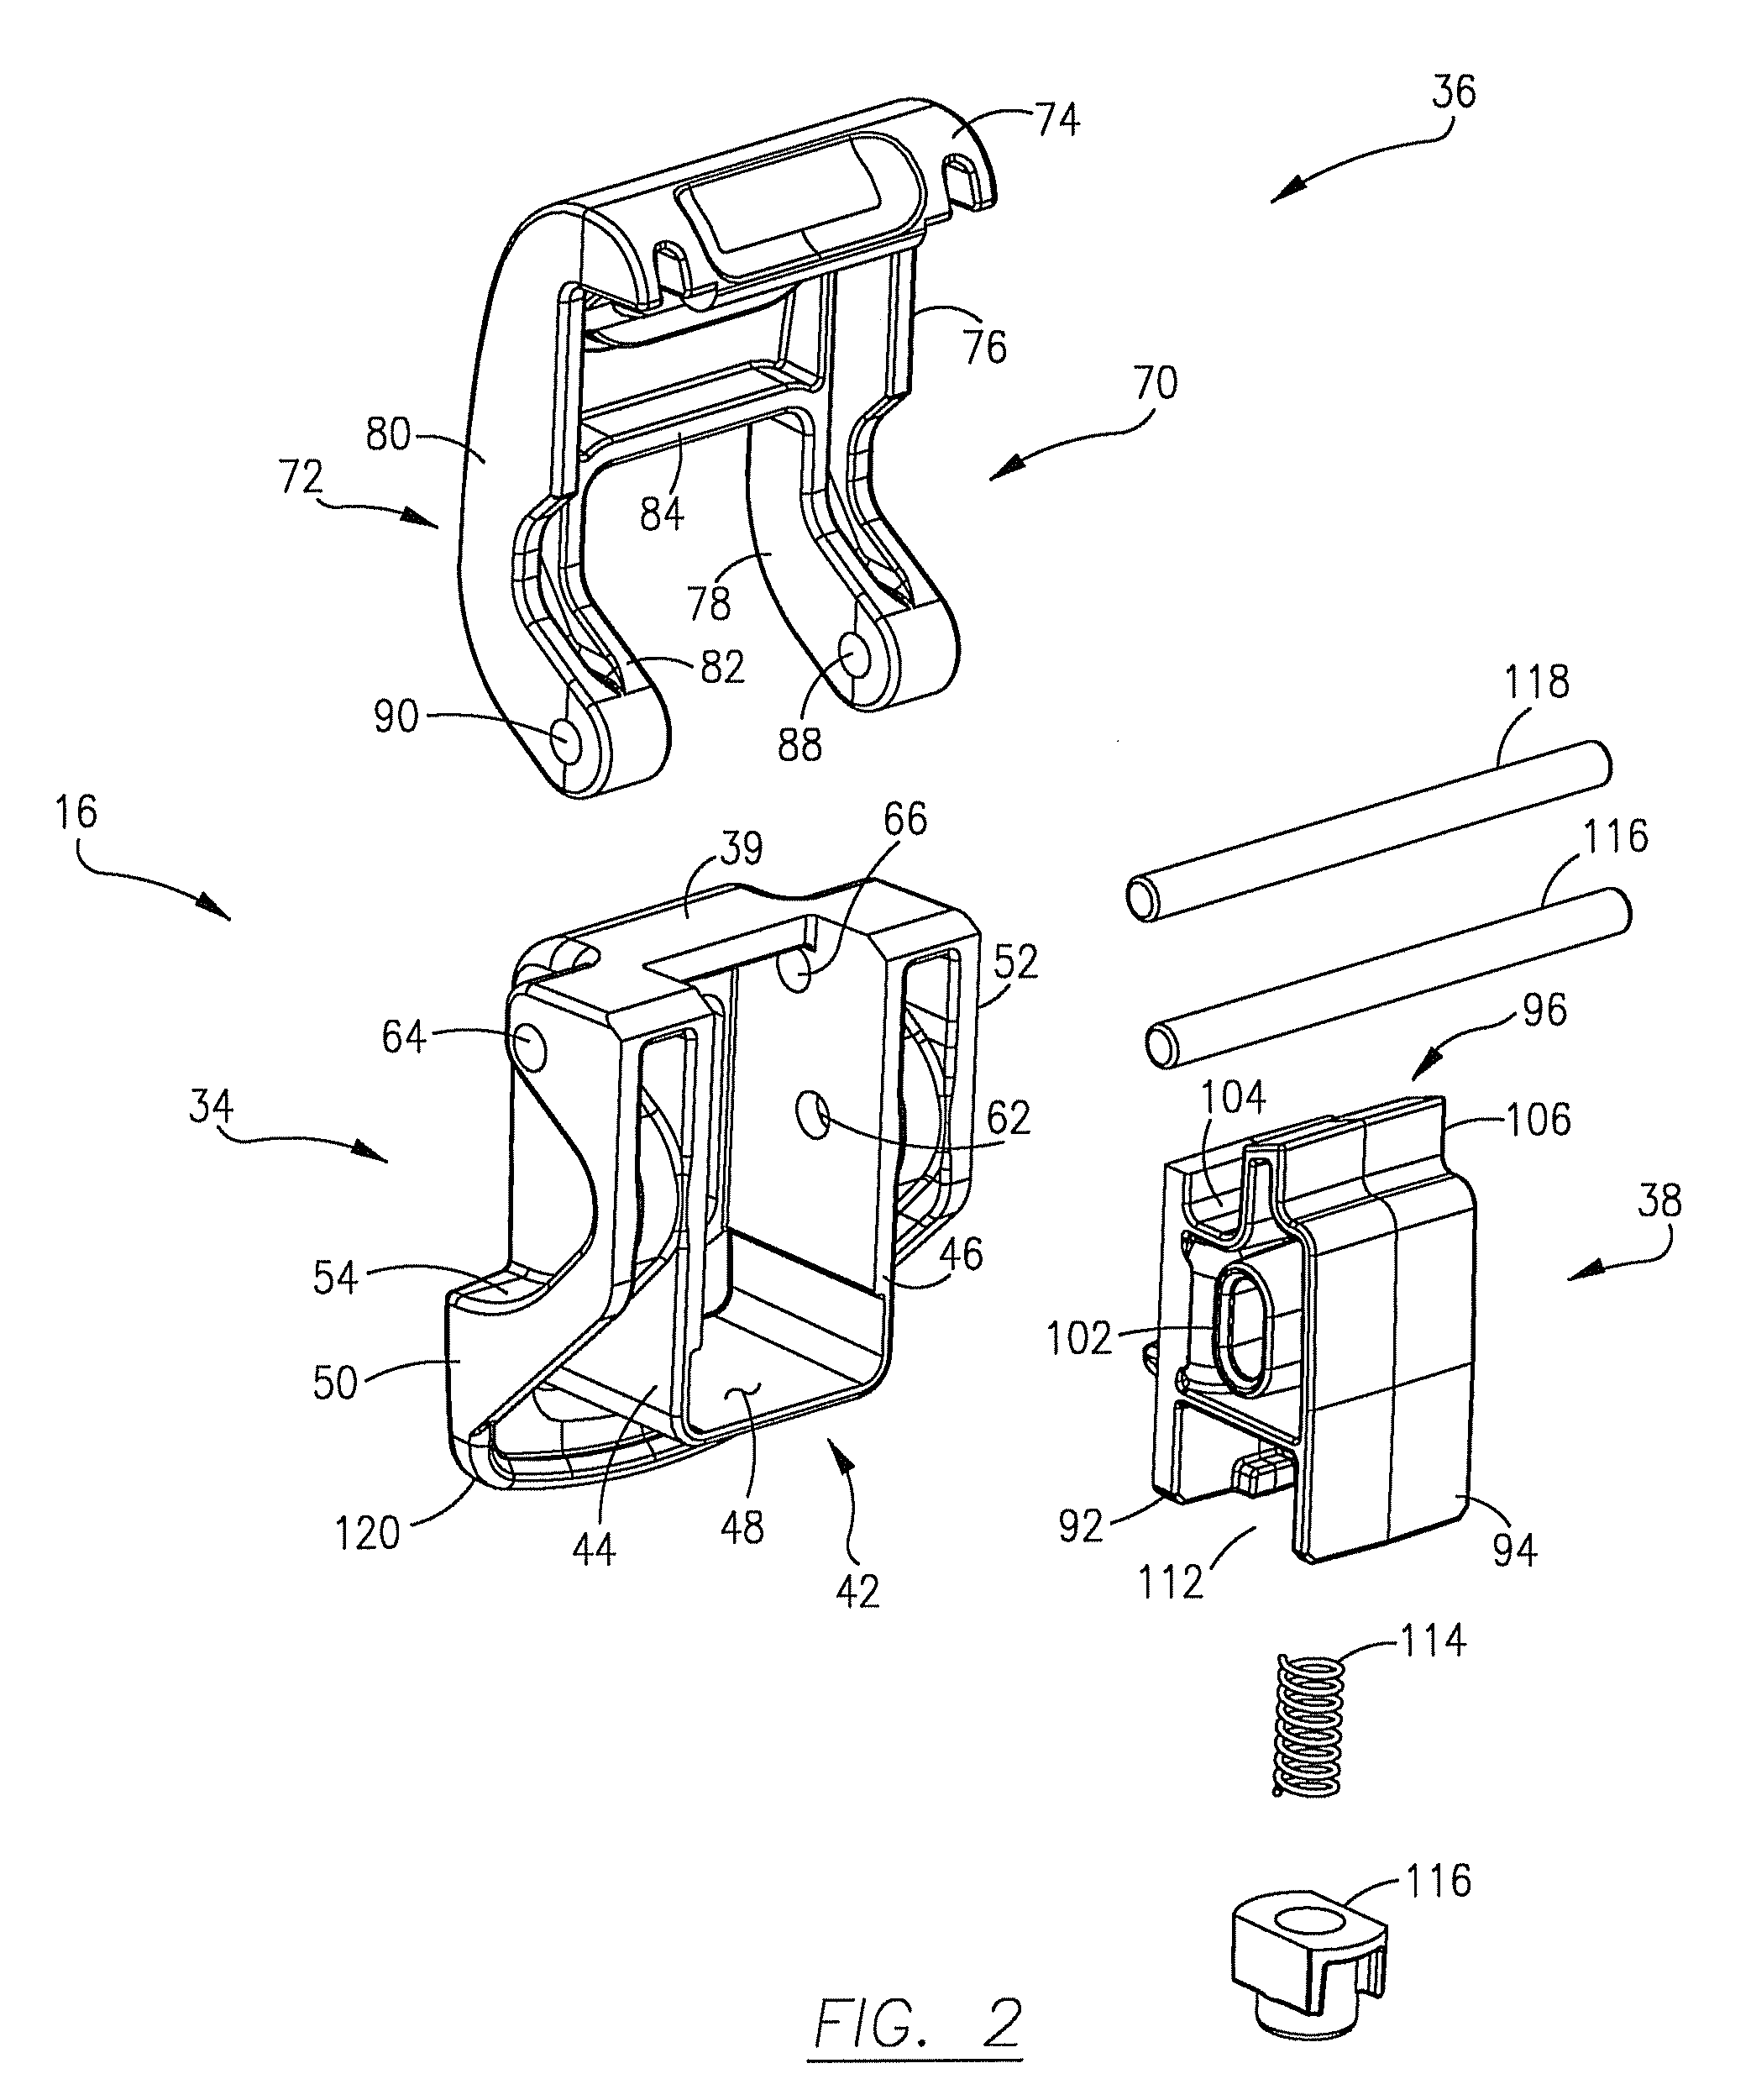 Carrying case with locking latch mechanism